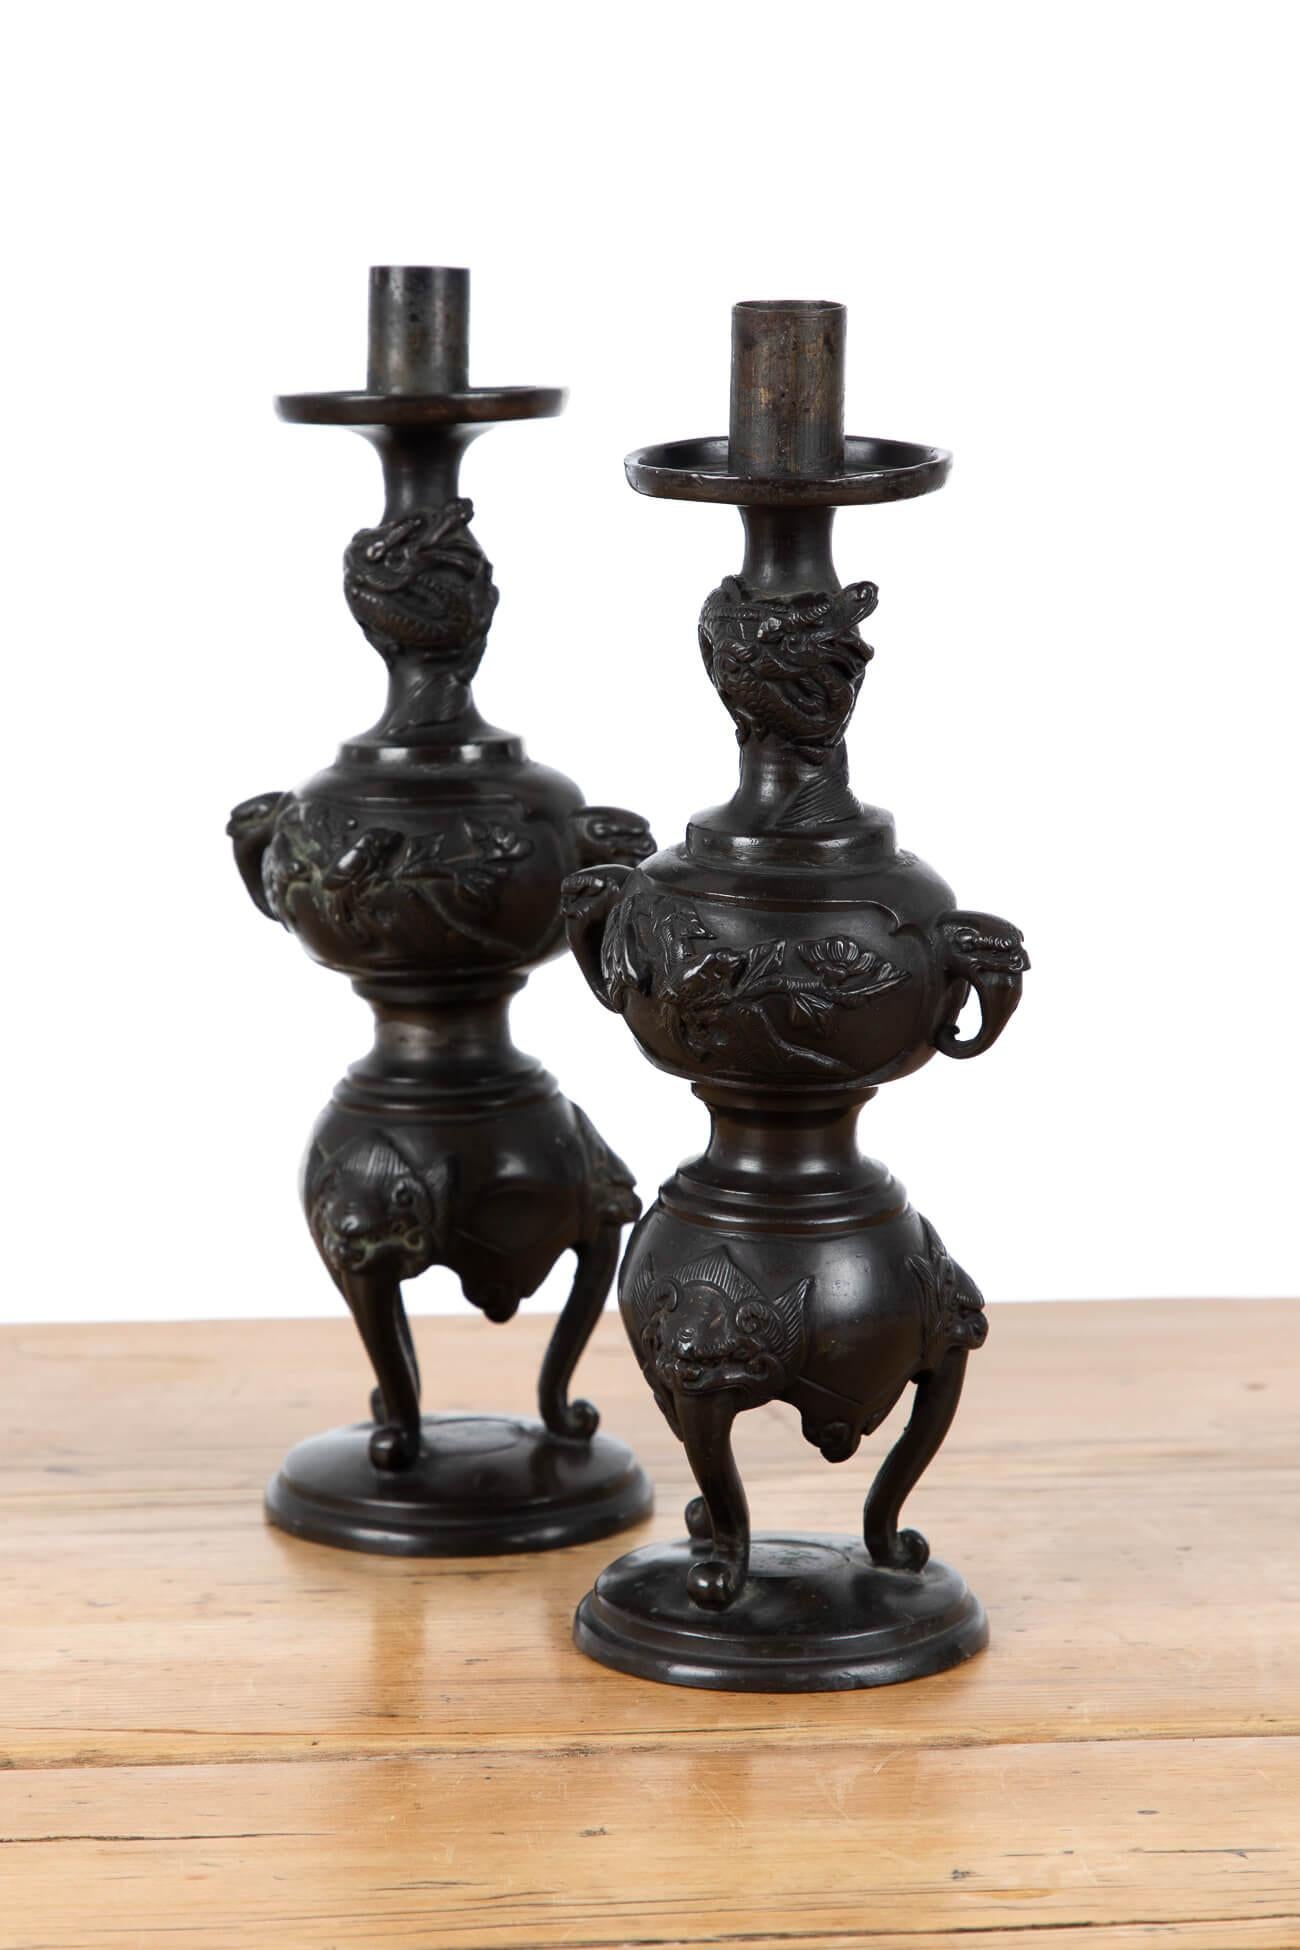 A pair of decorative Meiji Period Japanese bronze candlesticks. Adorned with birds and elephant trunk handles, raised on three lion-mask cabriole legs. Acquired from the collection of the late Alfred Theodore Arber-Cooke who was a passionate